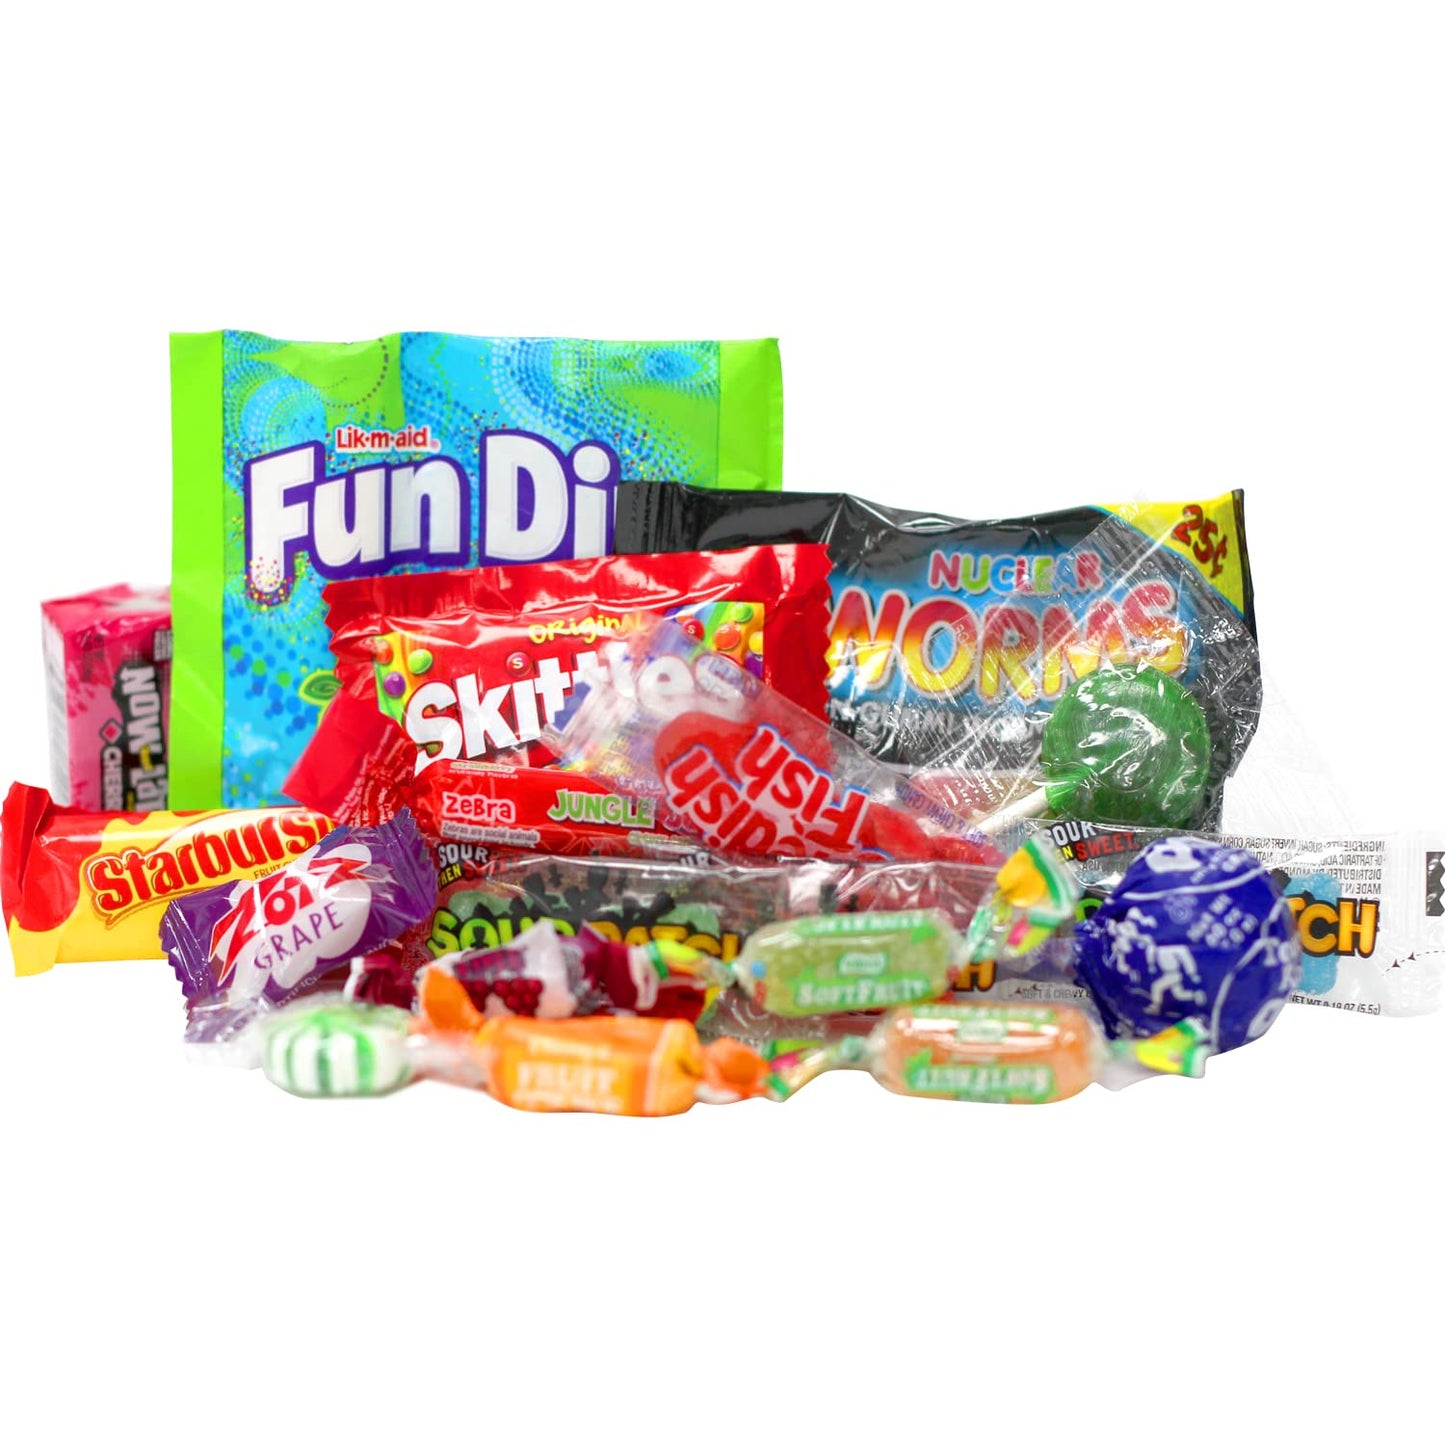 Candy Gift Box - 3 Pounds - Candy Care Package For Kids/Teens - Candy Variety Box - Birthday Candy Gift - Candy Cravebox - Candies for Pinata